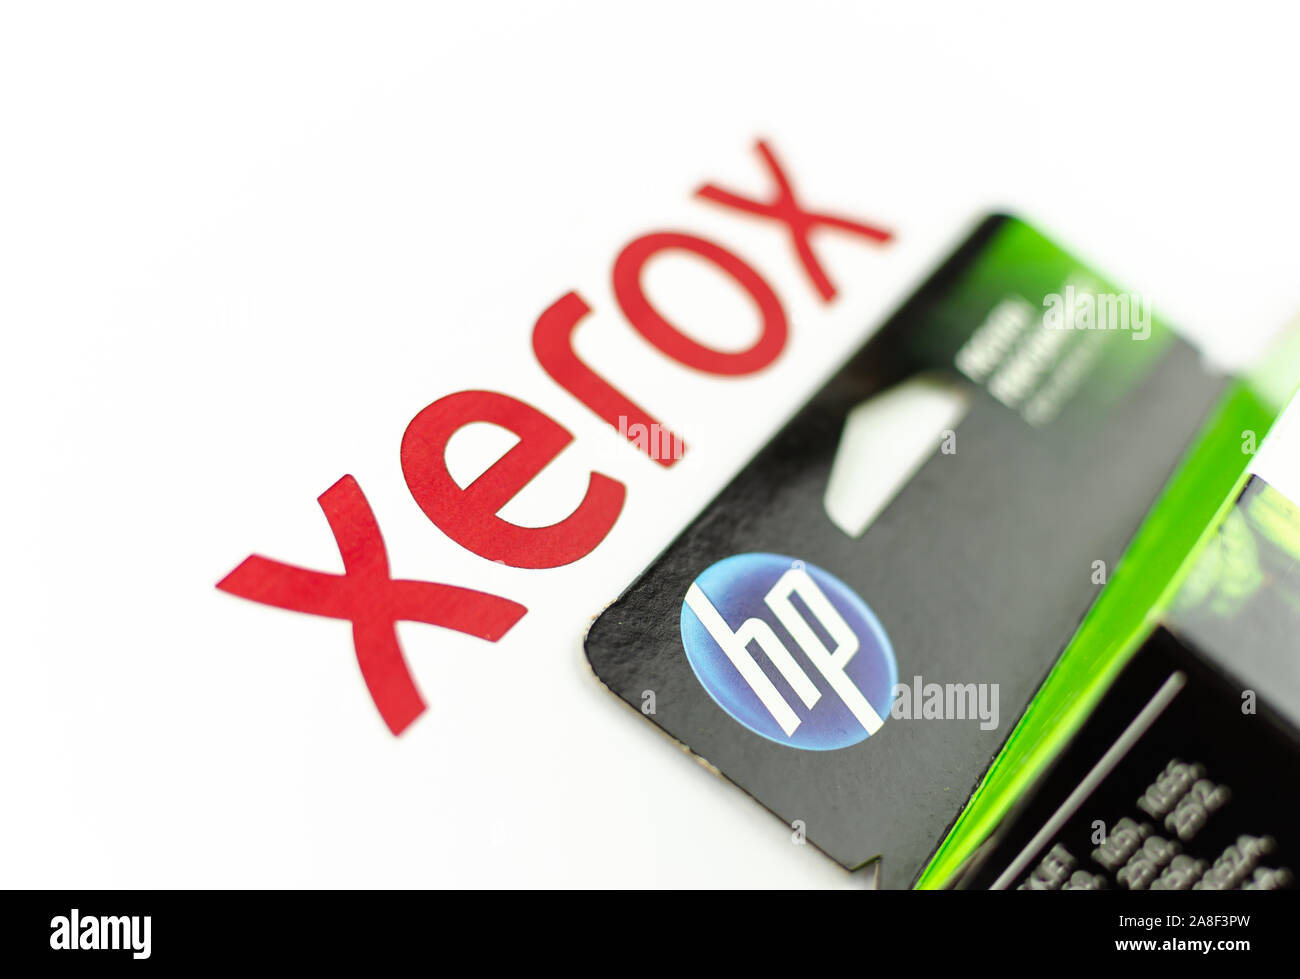 XEROX and HP logos seen on paper and printer cartridge ink. Concept photo - XEROX is a paper, HP is an ink. Selective focus. Stock Photo